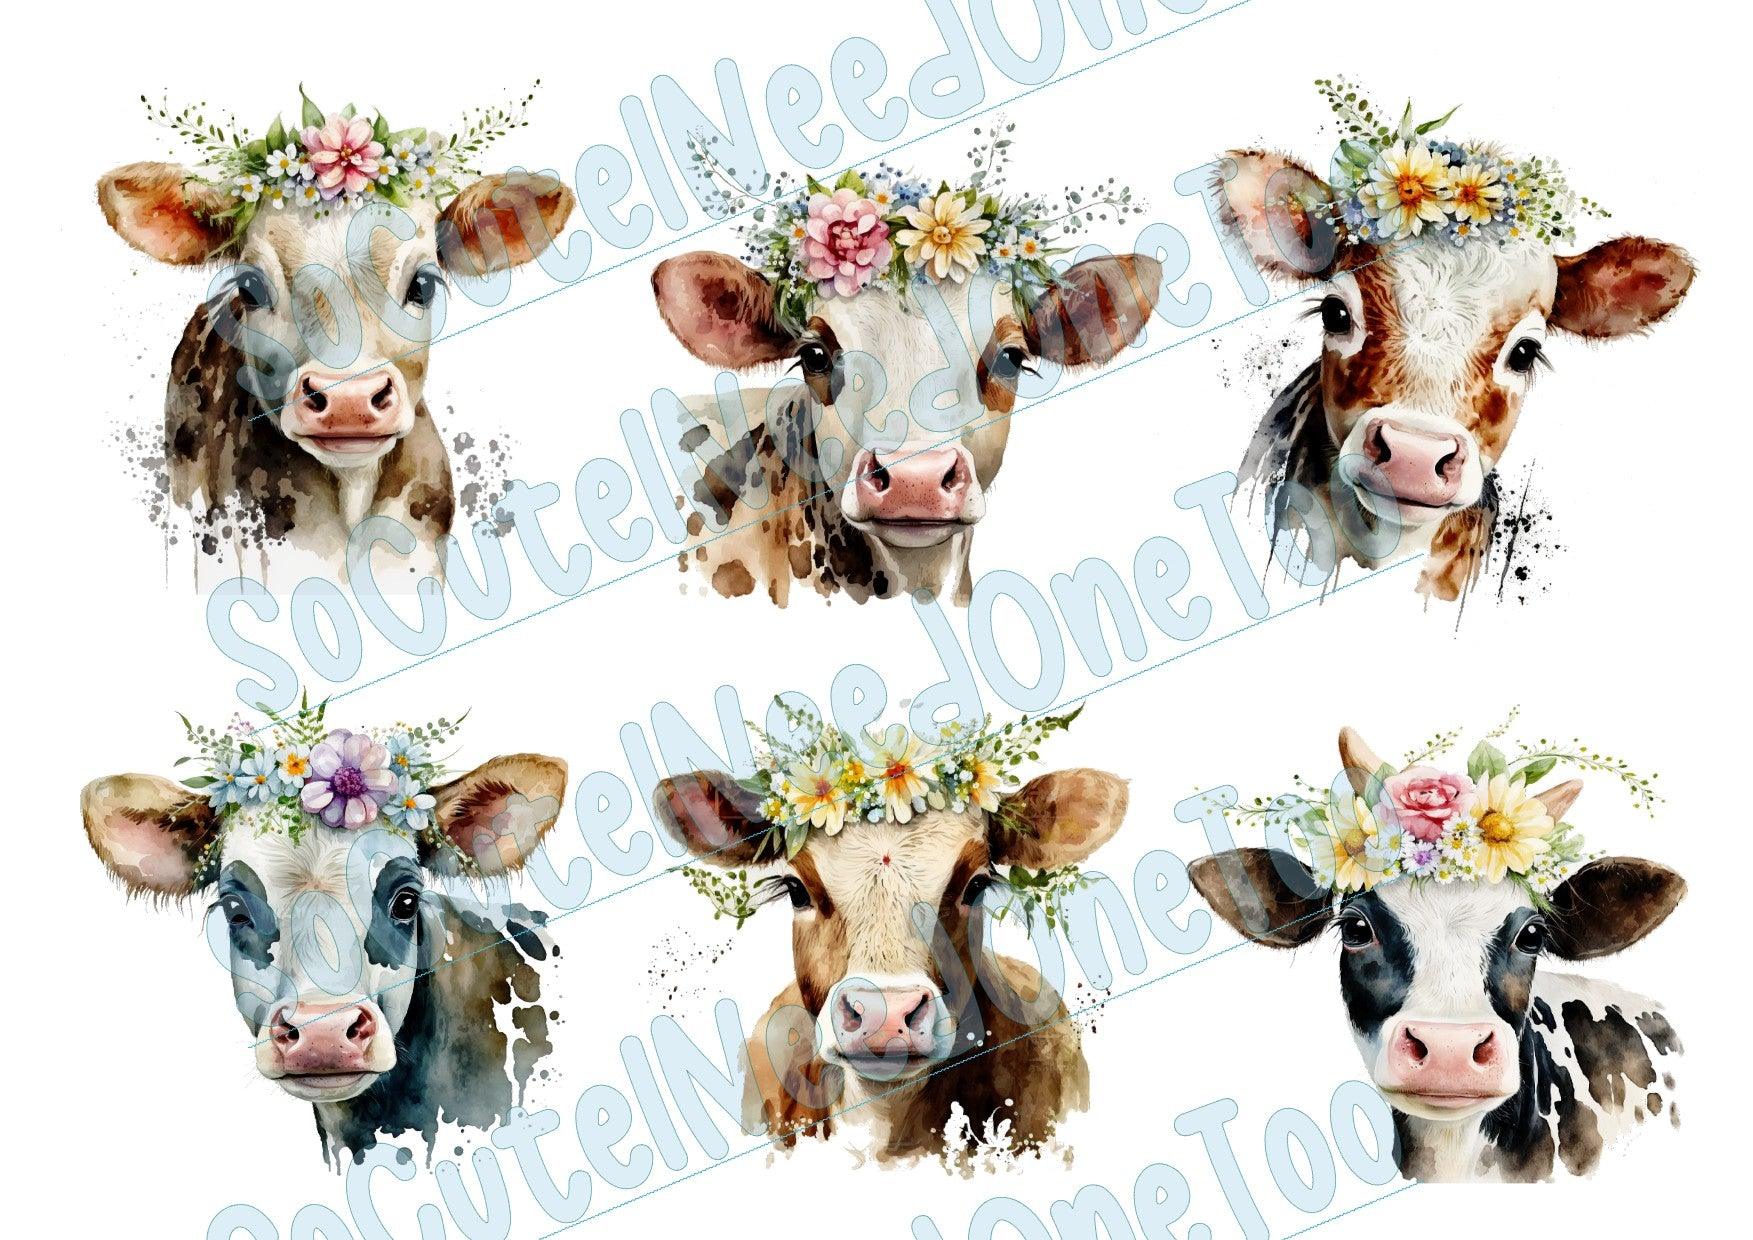 Cows with Flower Crowns #2 on Clear/White Waterslide Paper Ready To Use - SoCuteINeedOneToo